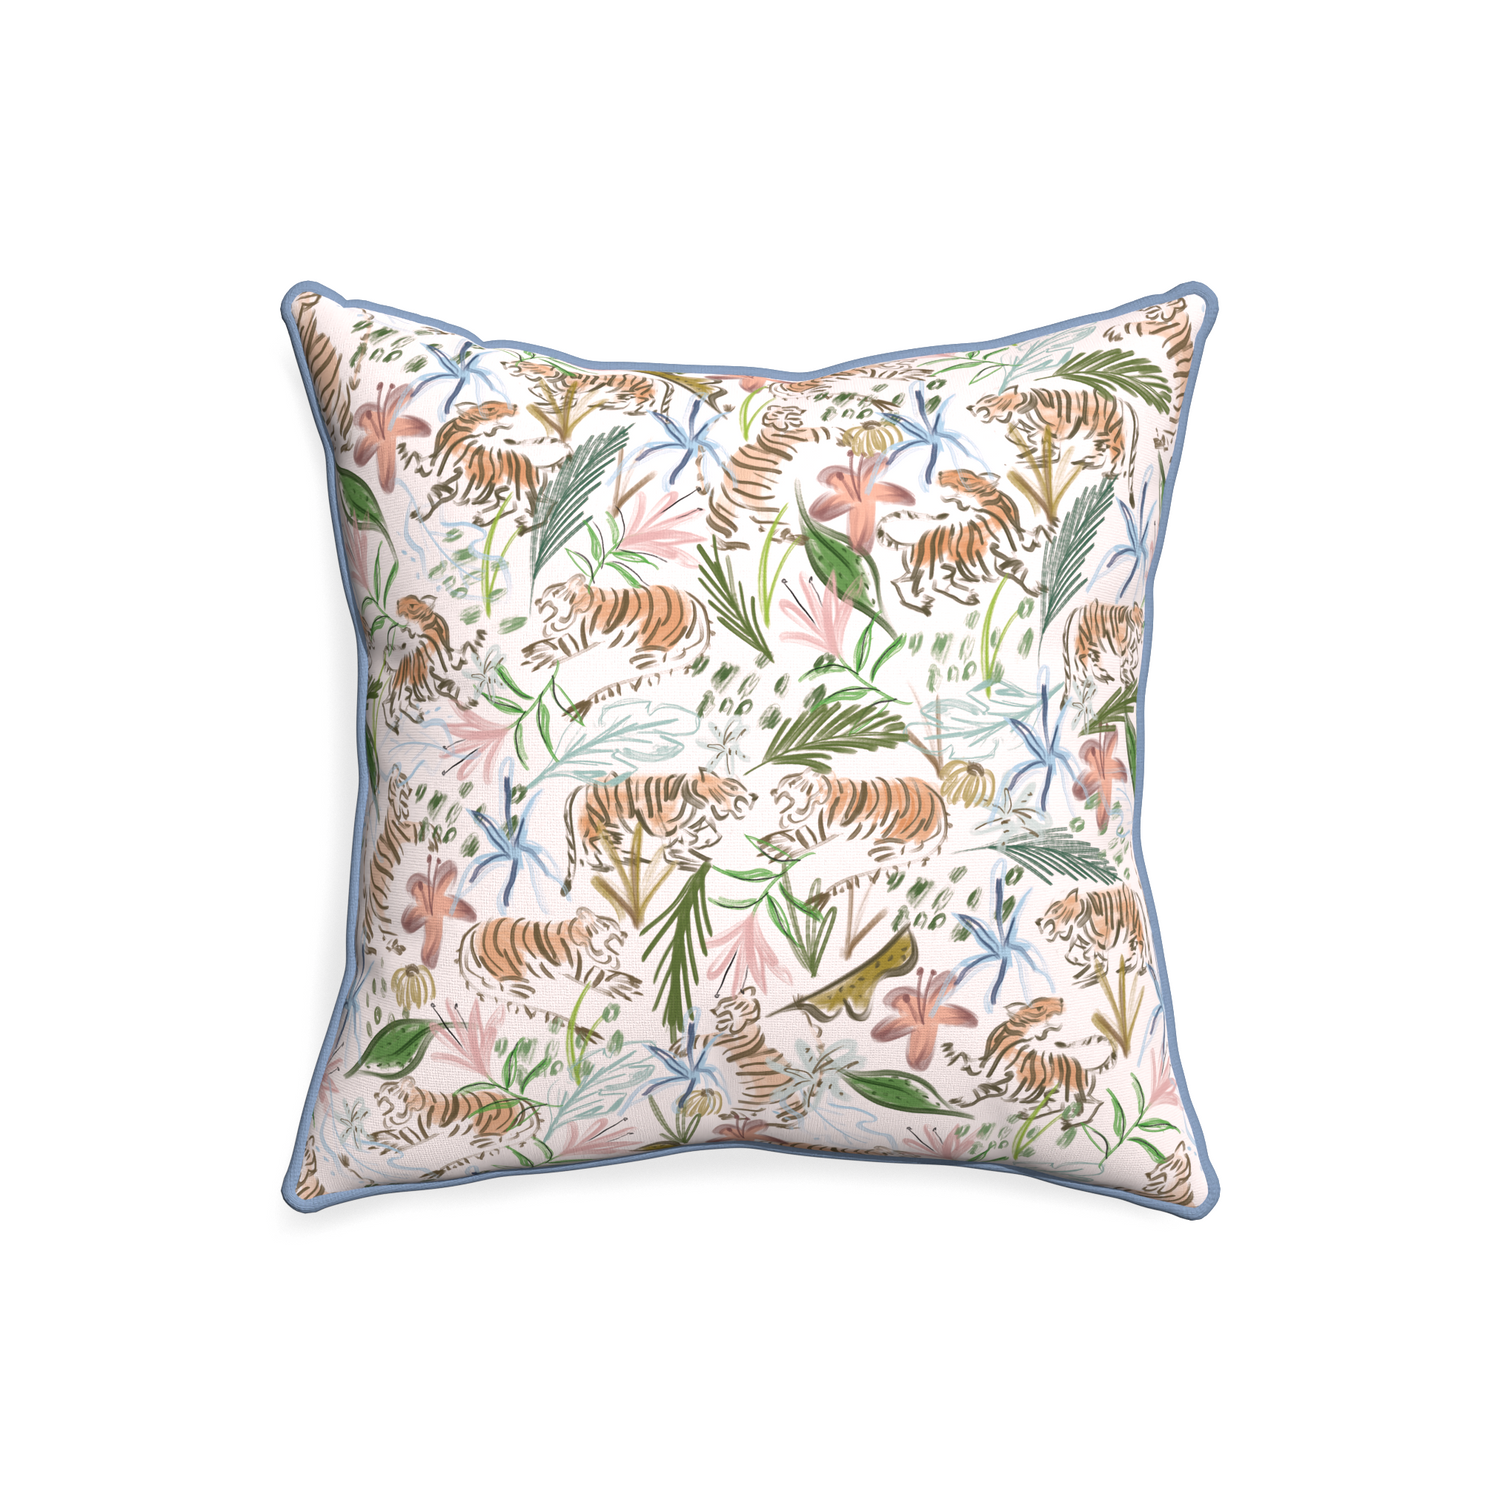 20-square frida pink custom pink chinoiserie tigerpillow with sky piping on white background